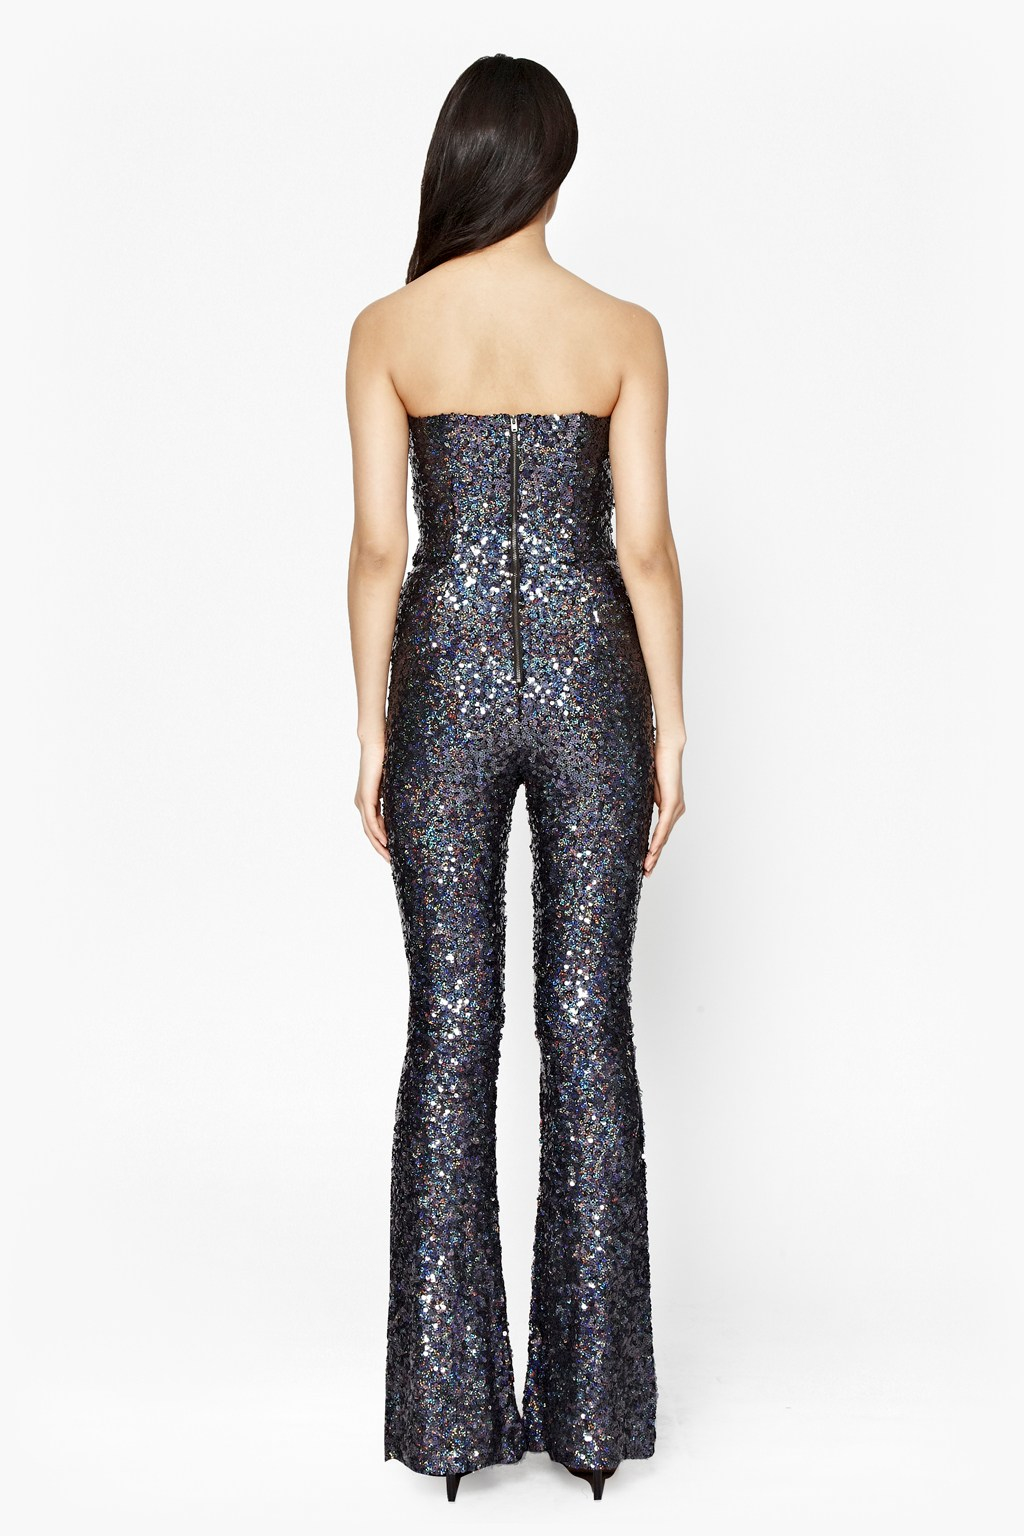 French Connection Synthetic Lunar Sparkle Sequin Jumpsuit in Charcoal ...